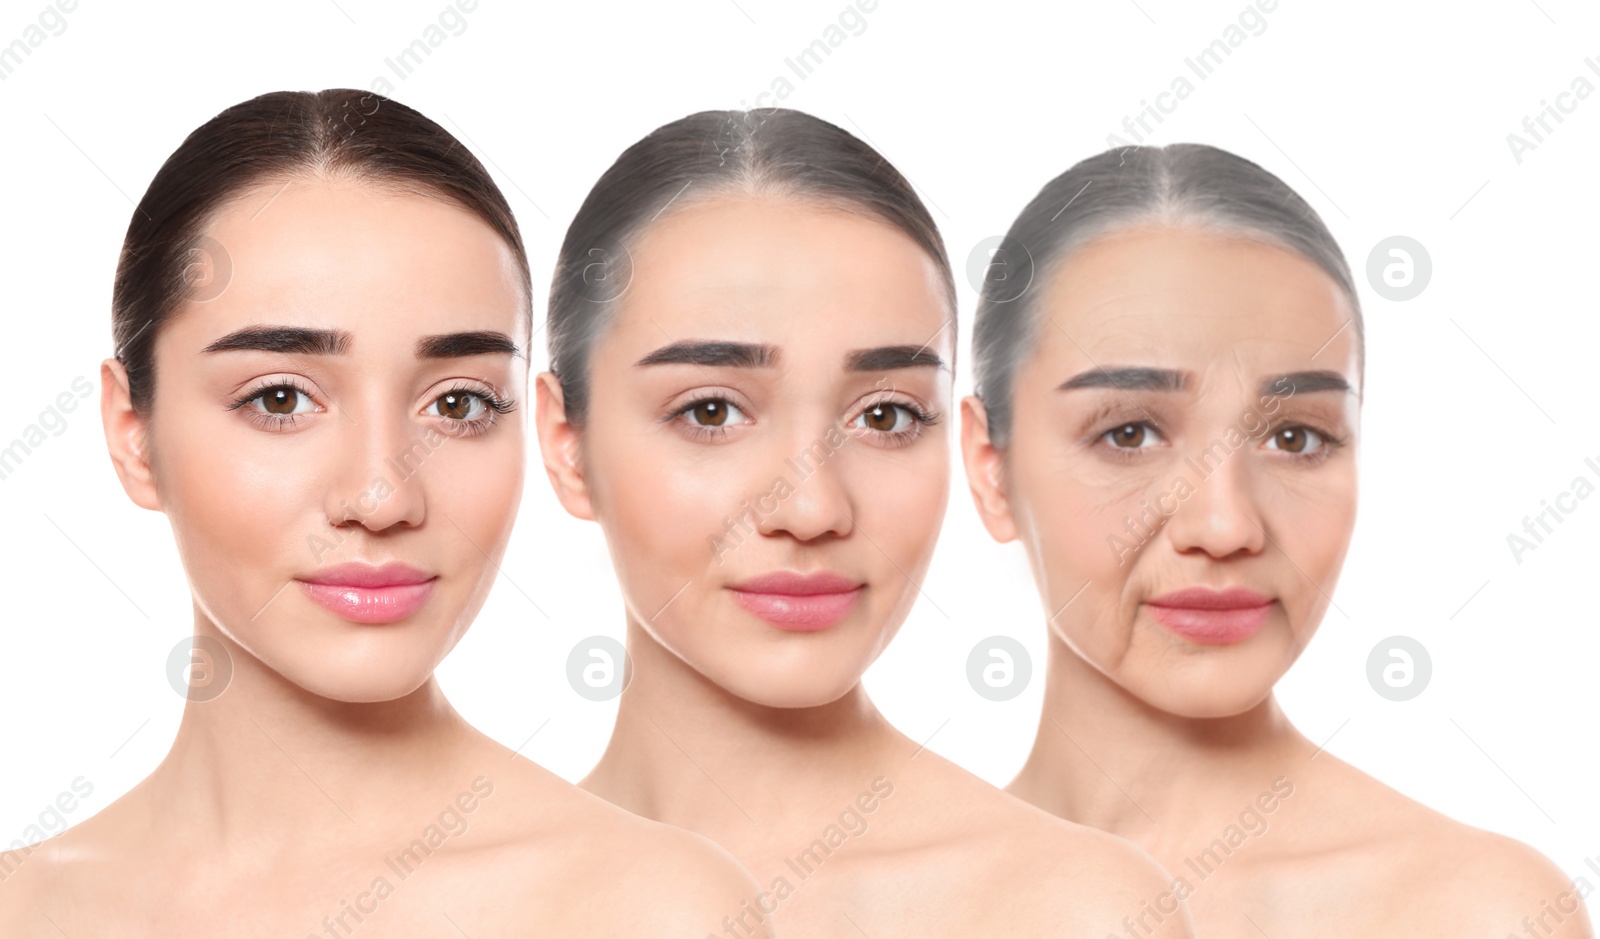 Image of Natural aging, comparison. Portraits of woman in different ages on white background